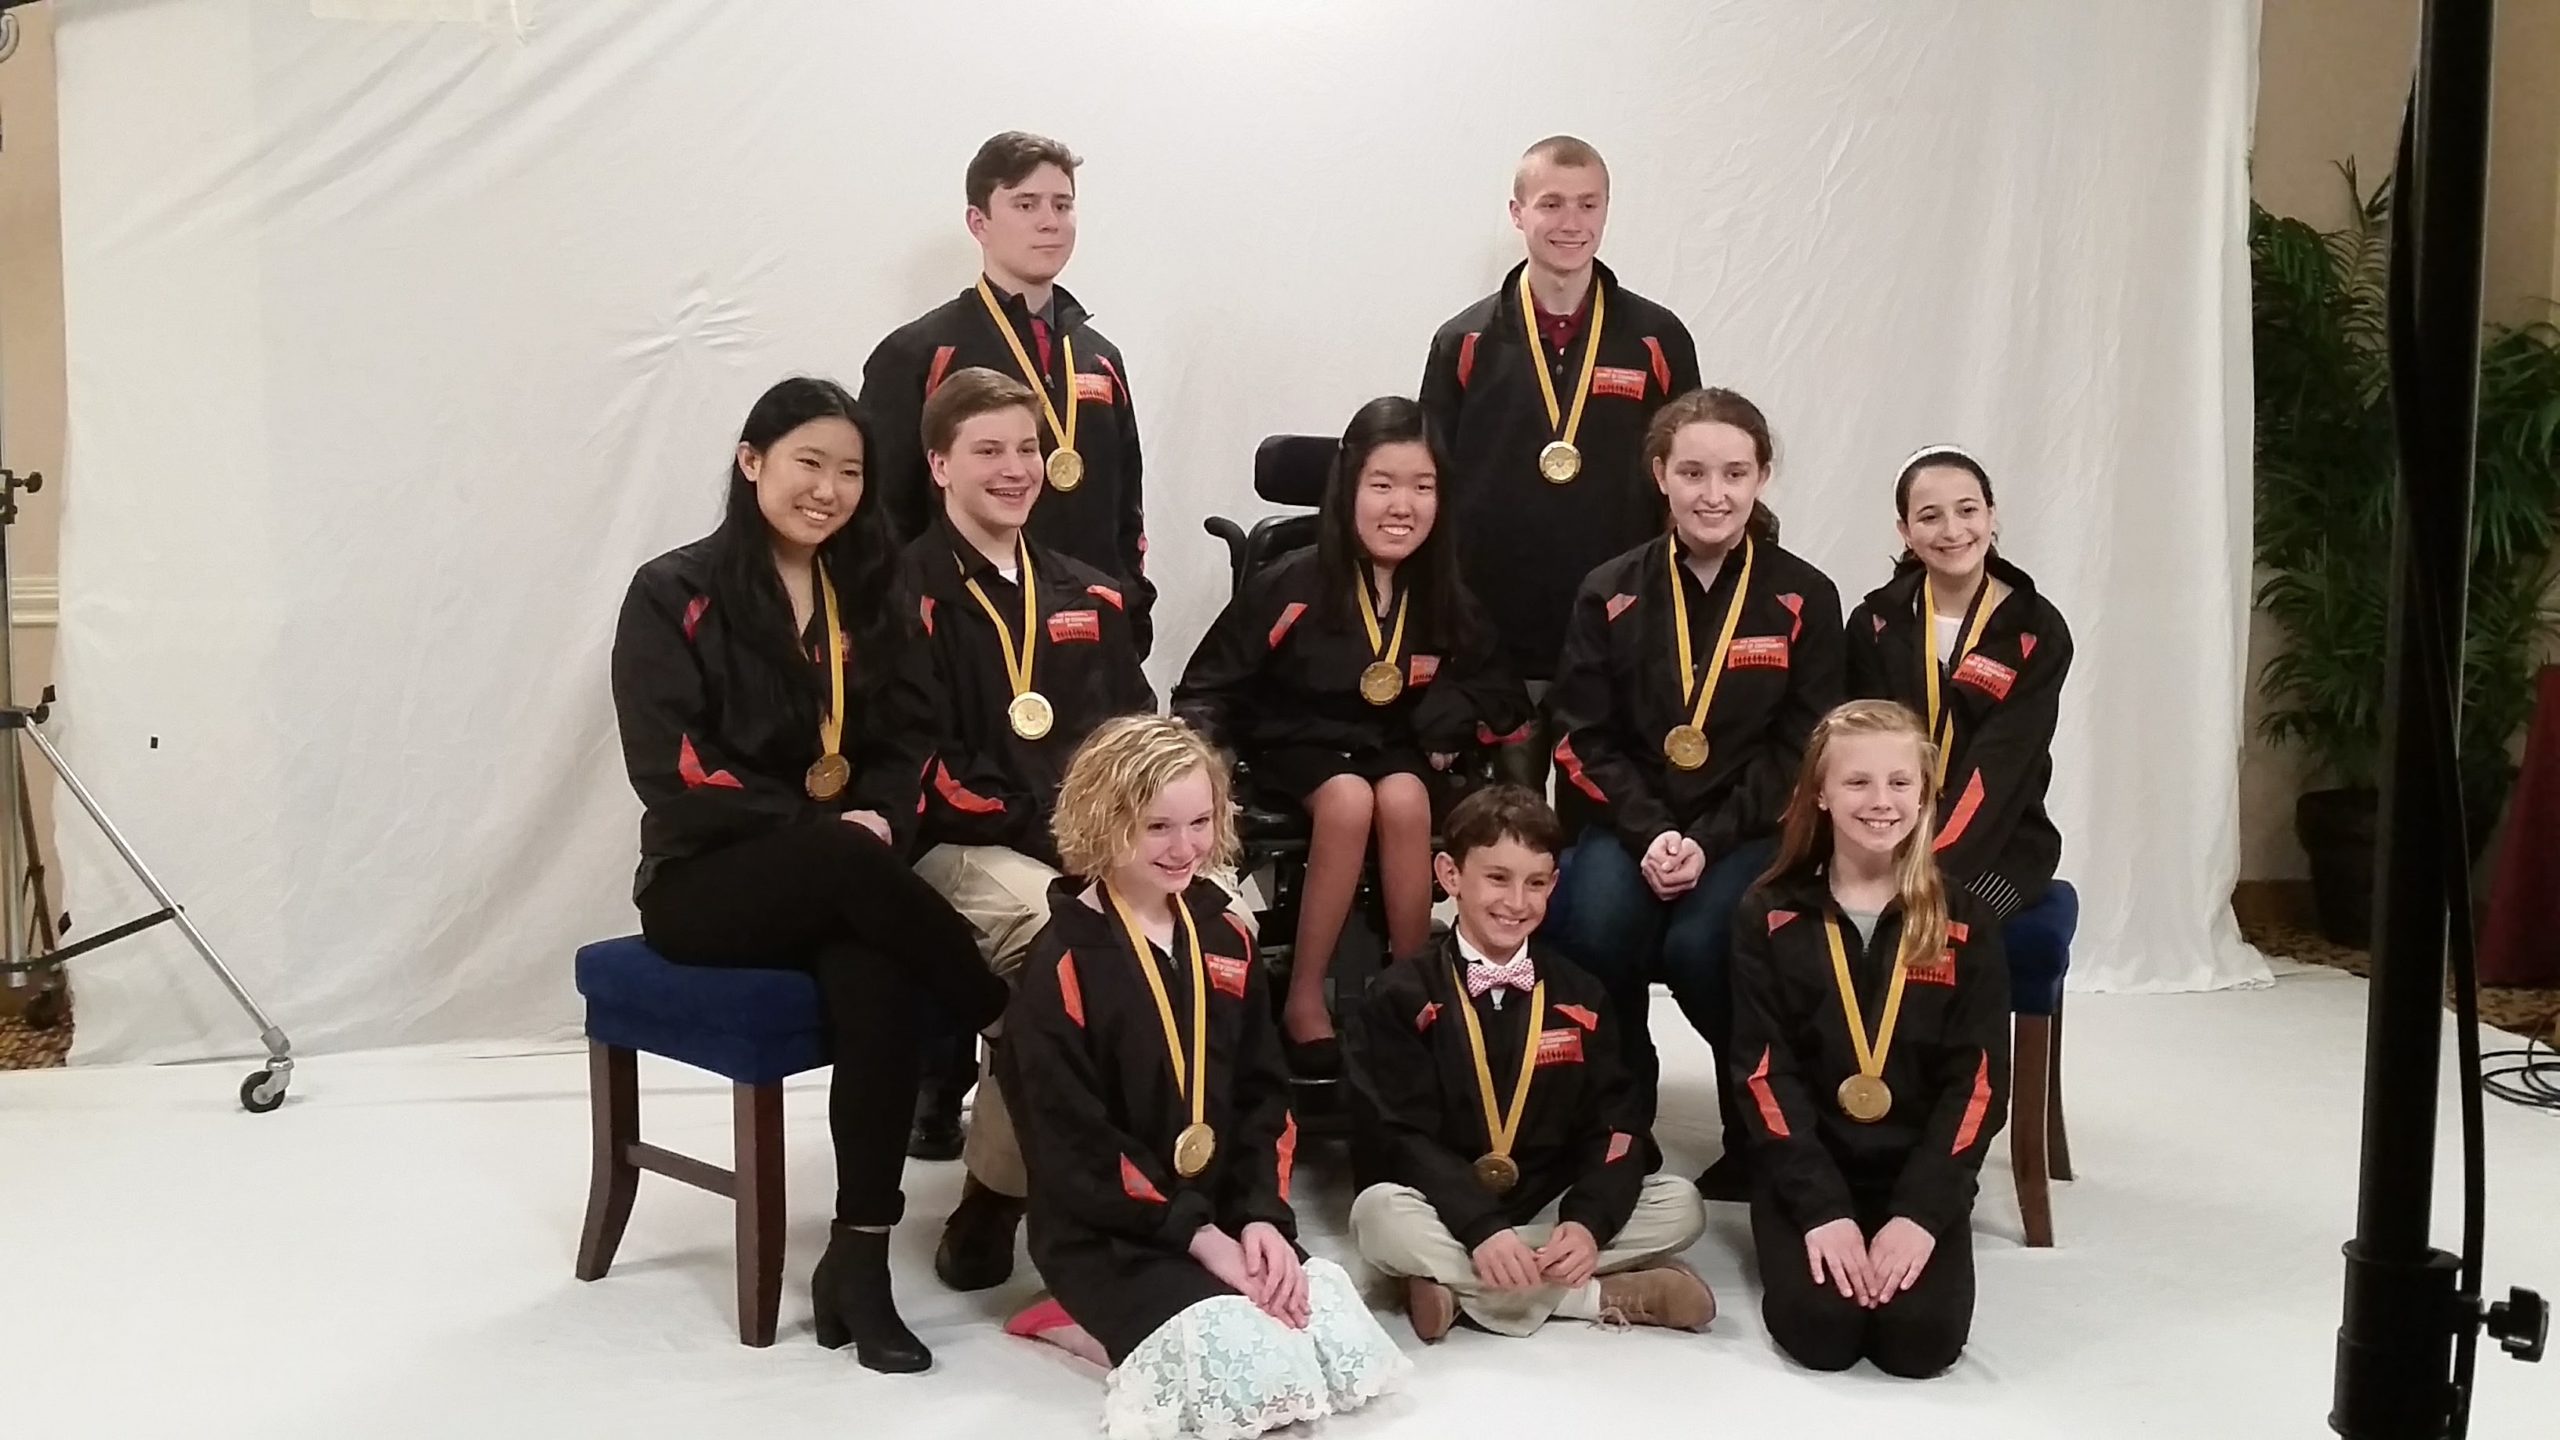 Channel One News – Prudential Spirit of Community Awards Honors Youth Volunteers